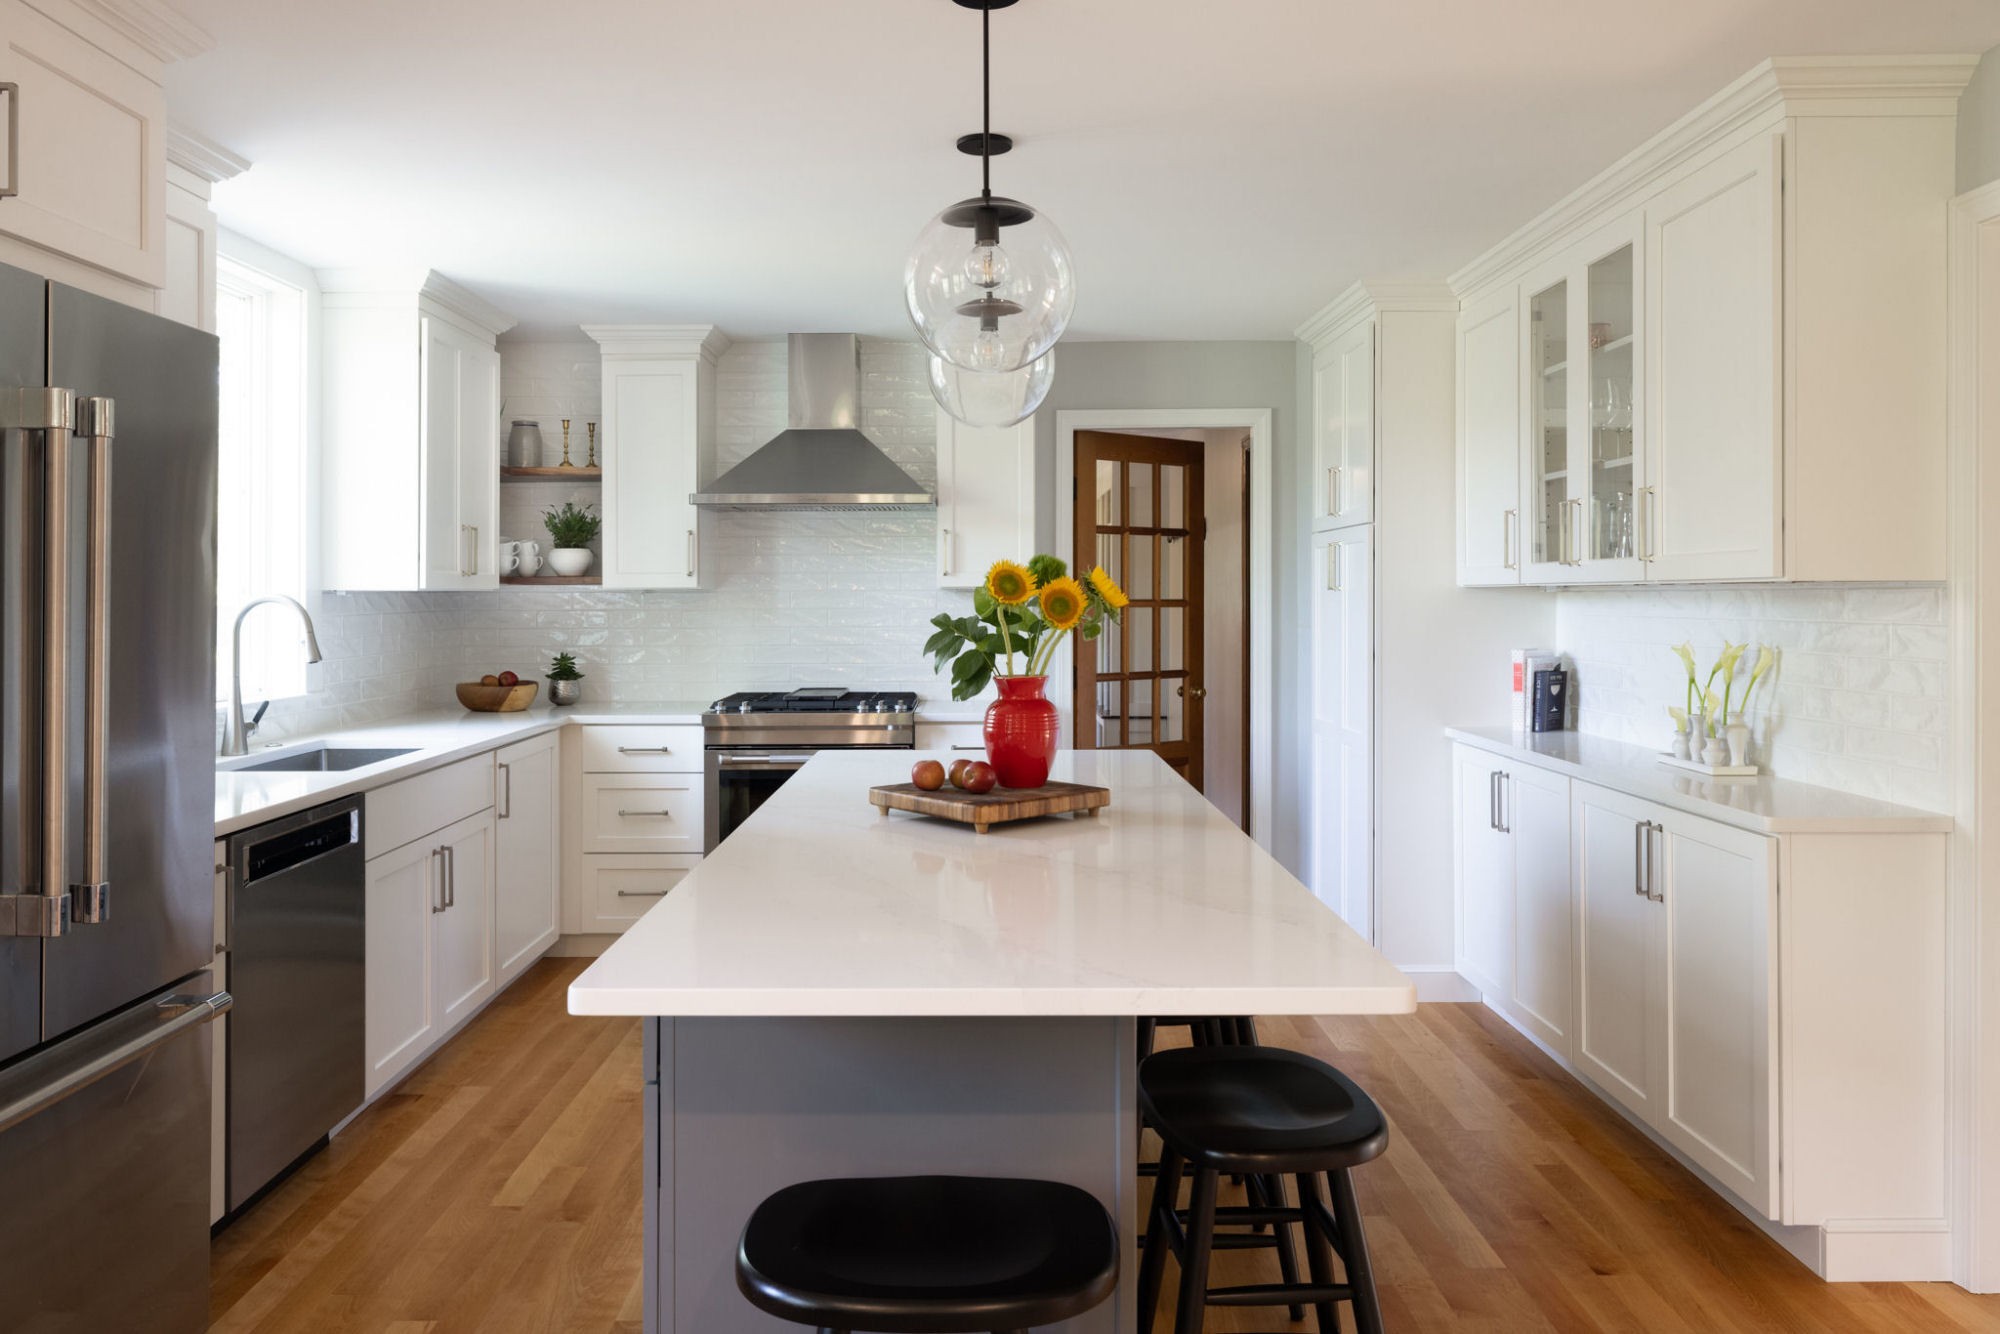 Kitchen Design in Wakefield MA with white and gray cabinetry